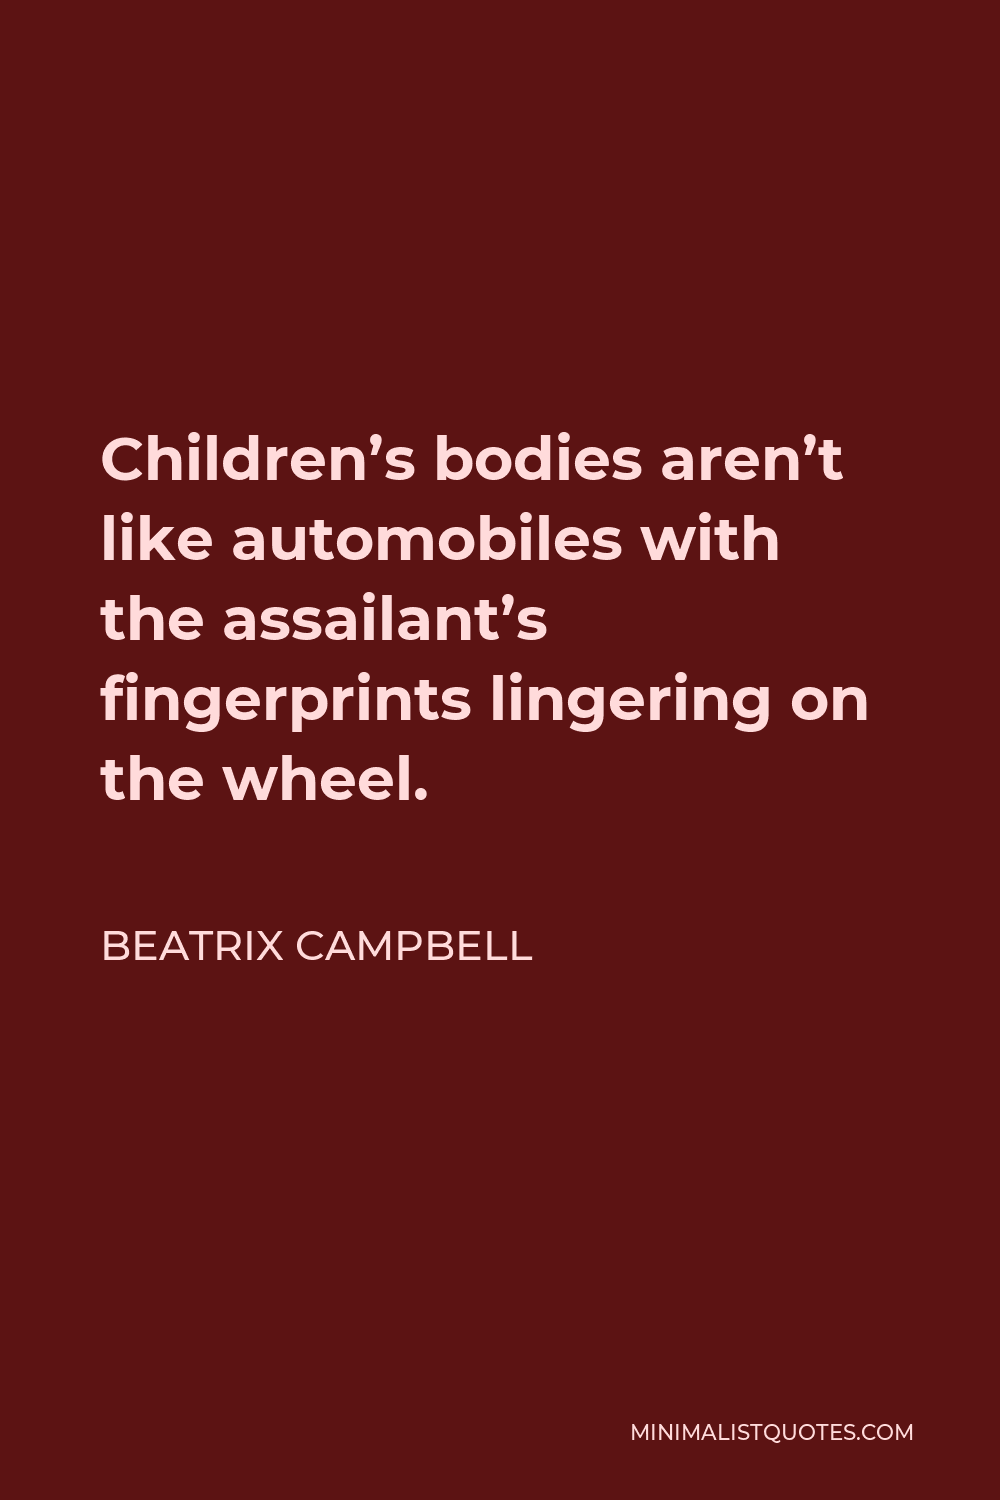 Beatrix Campbell Quote - Children’s bodies aren’t like automobiles with the assailant’s fingerprints lingering on the wheel.